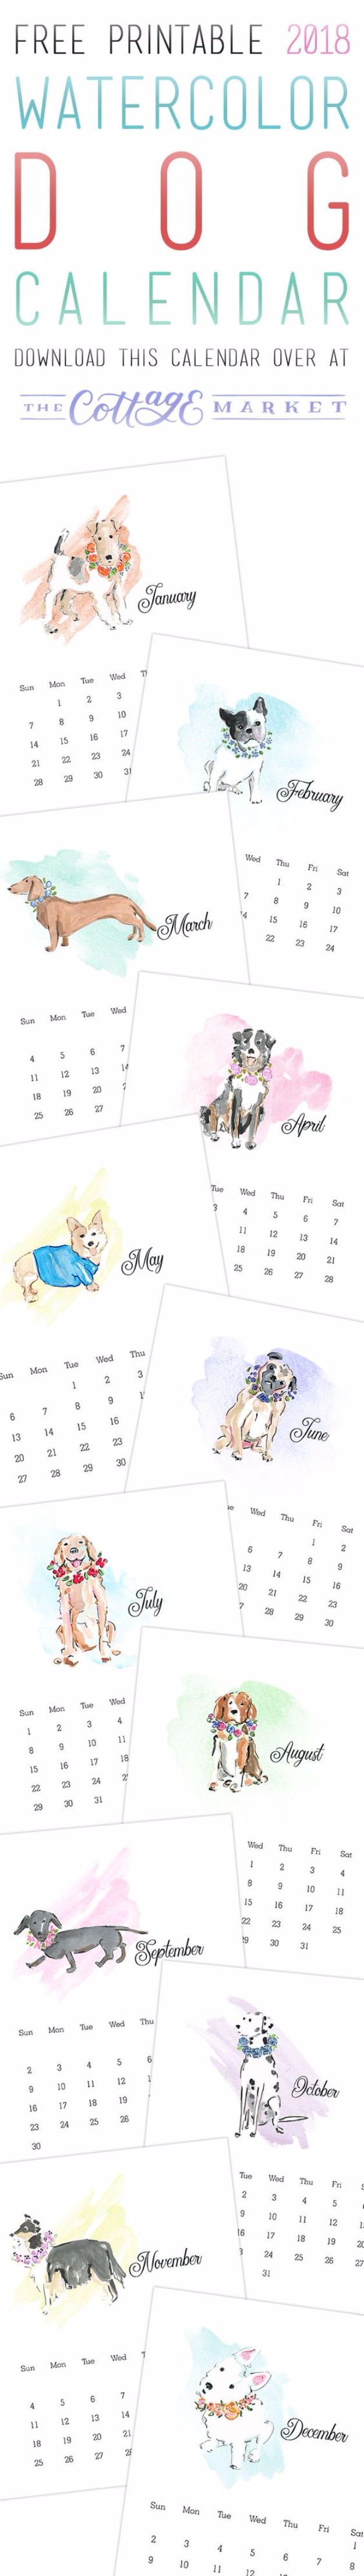 DIY Ideas With Dogs - Watercolor Dog Calendar Free Printable - Cute and Easy DIY Projects for Dog Lovers - Wall and Home Decor Projects, Things To Make and Sell on Etsy - Quick Gifts to Make for Friends Who Have Puppies and Doggies - Homemade No Sew Projects- Fun Jewelry, Cool Clothes and Accessories #dogs #crafts #diyideas